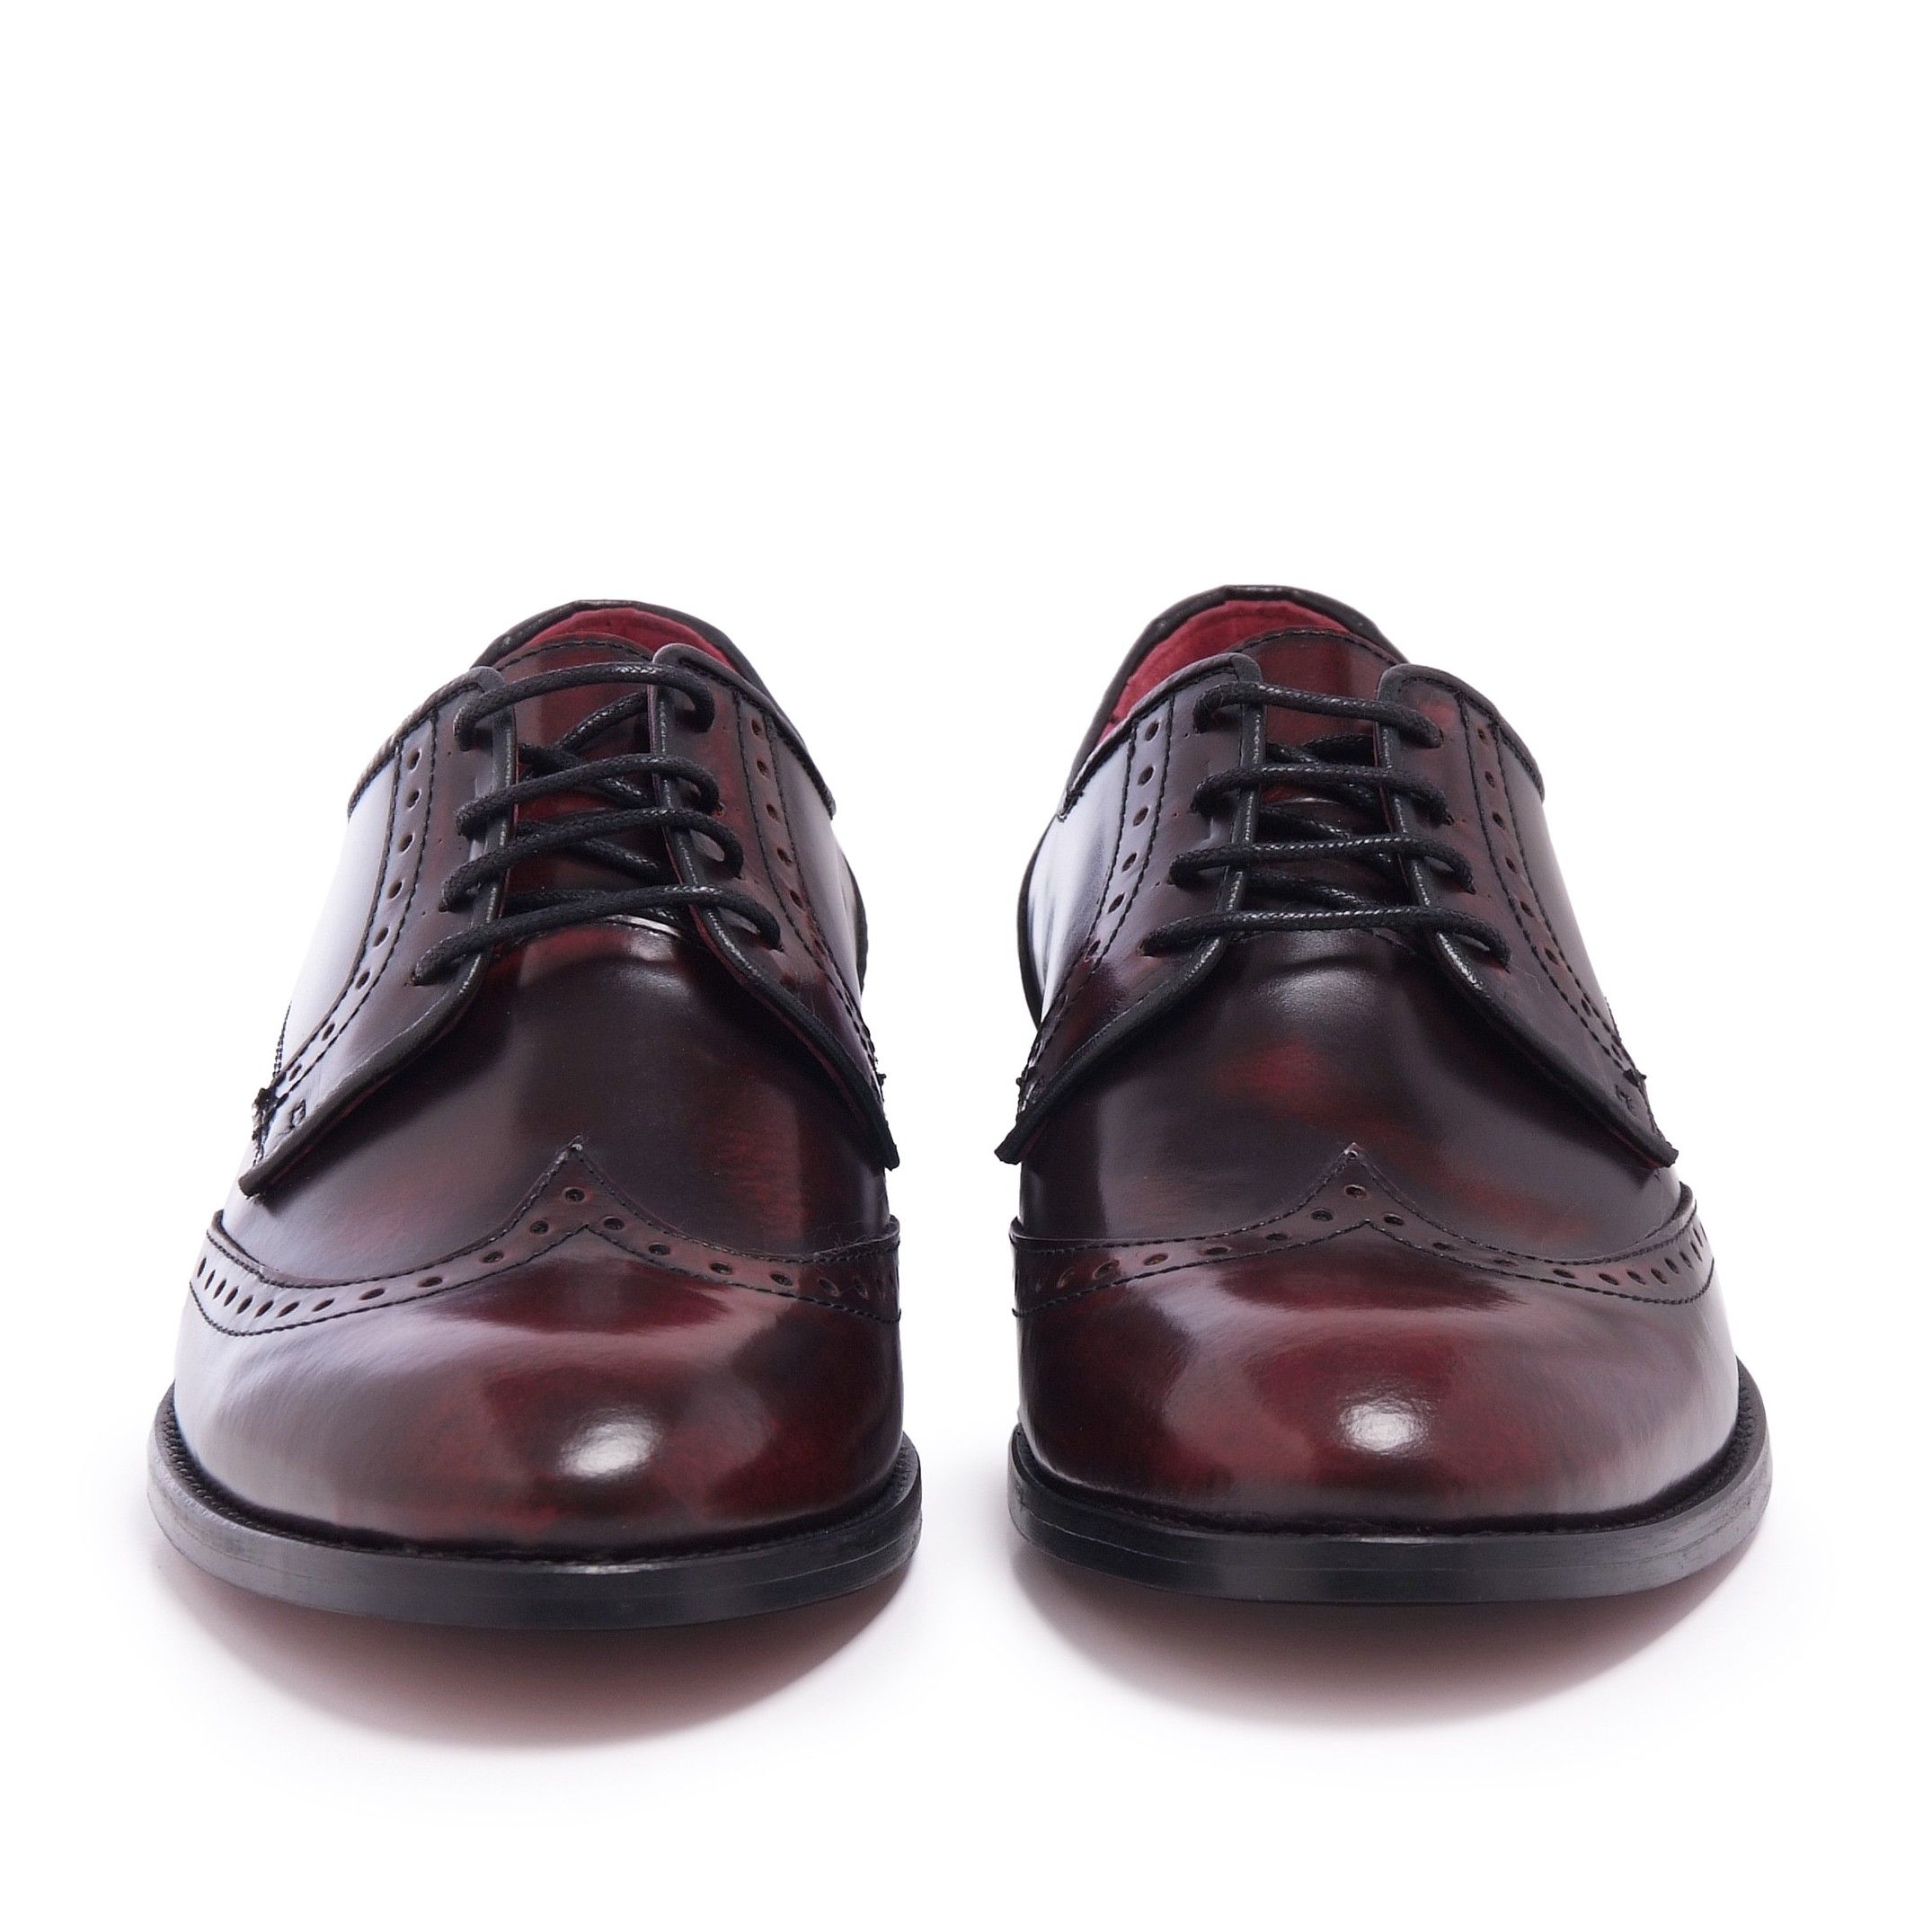 Blucher leather shoes. Upper and inner made of leather. Rubber sole. Made in Spain. By Castellanisimos